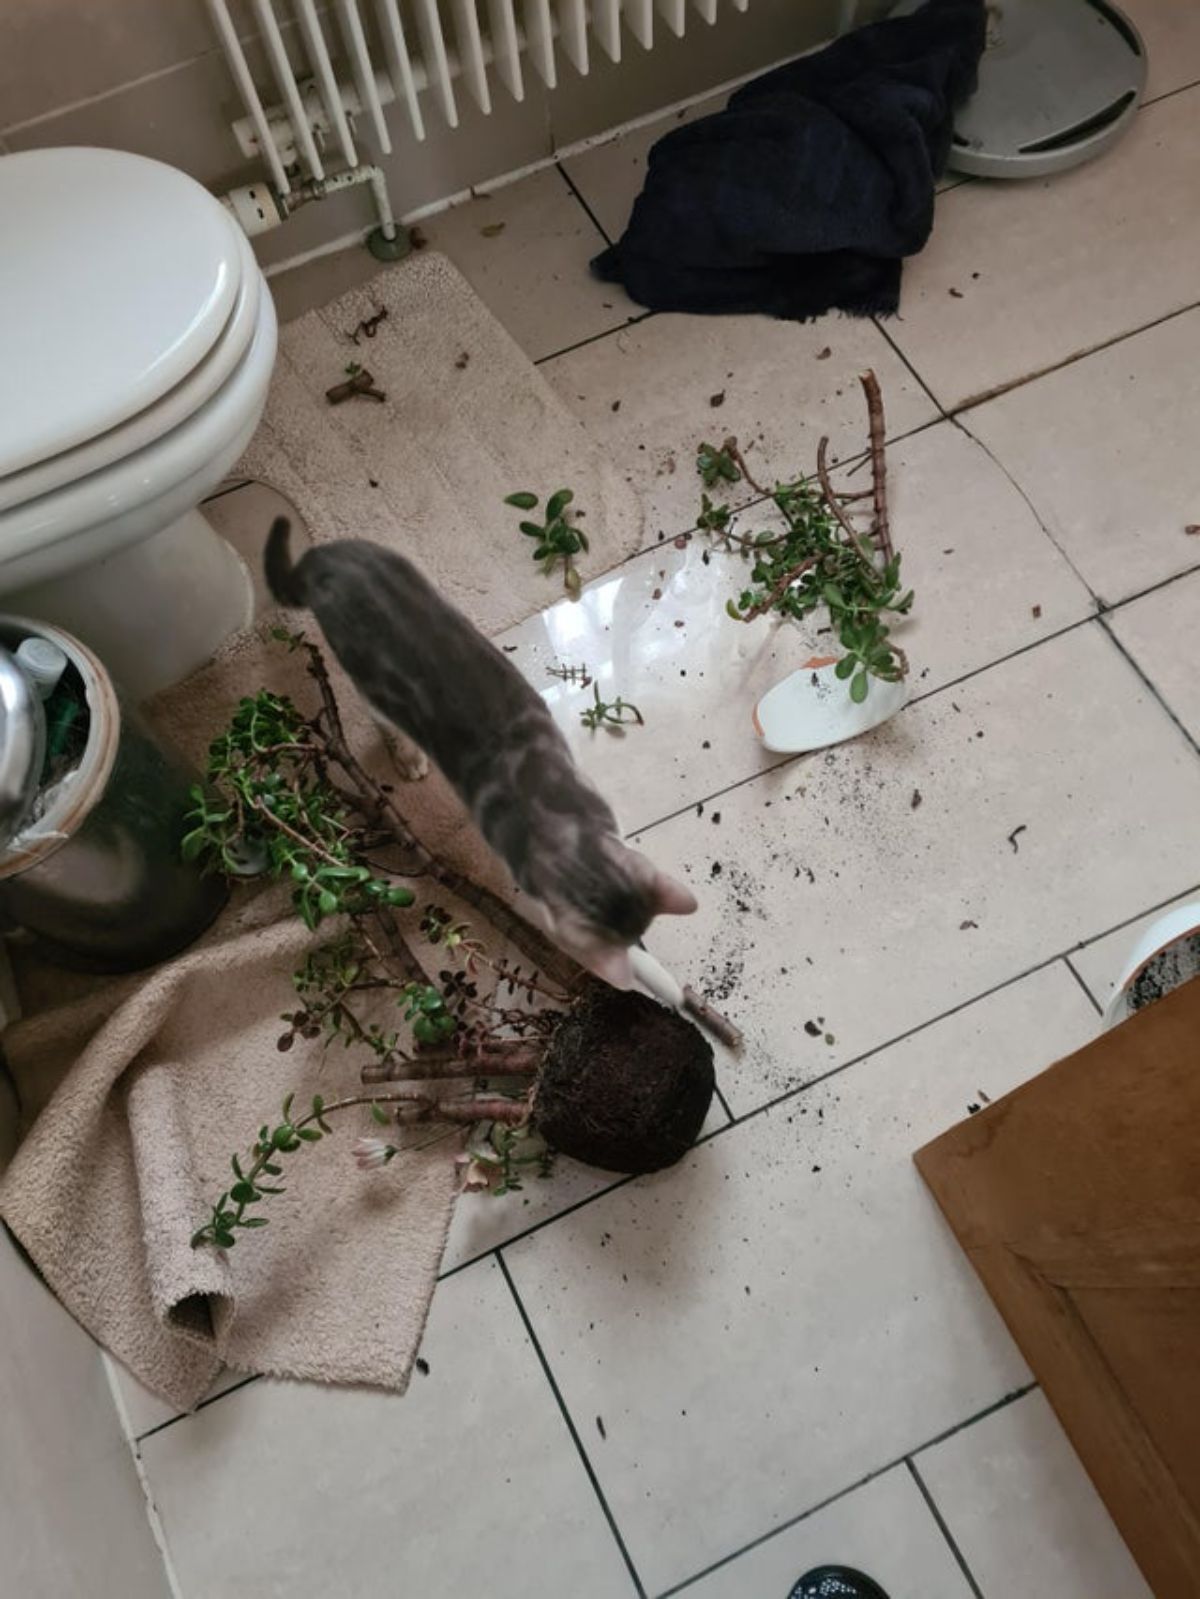 grey and white tabby cat in a bathroom with a smashed plant pot